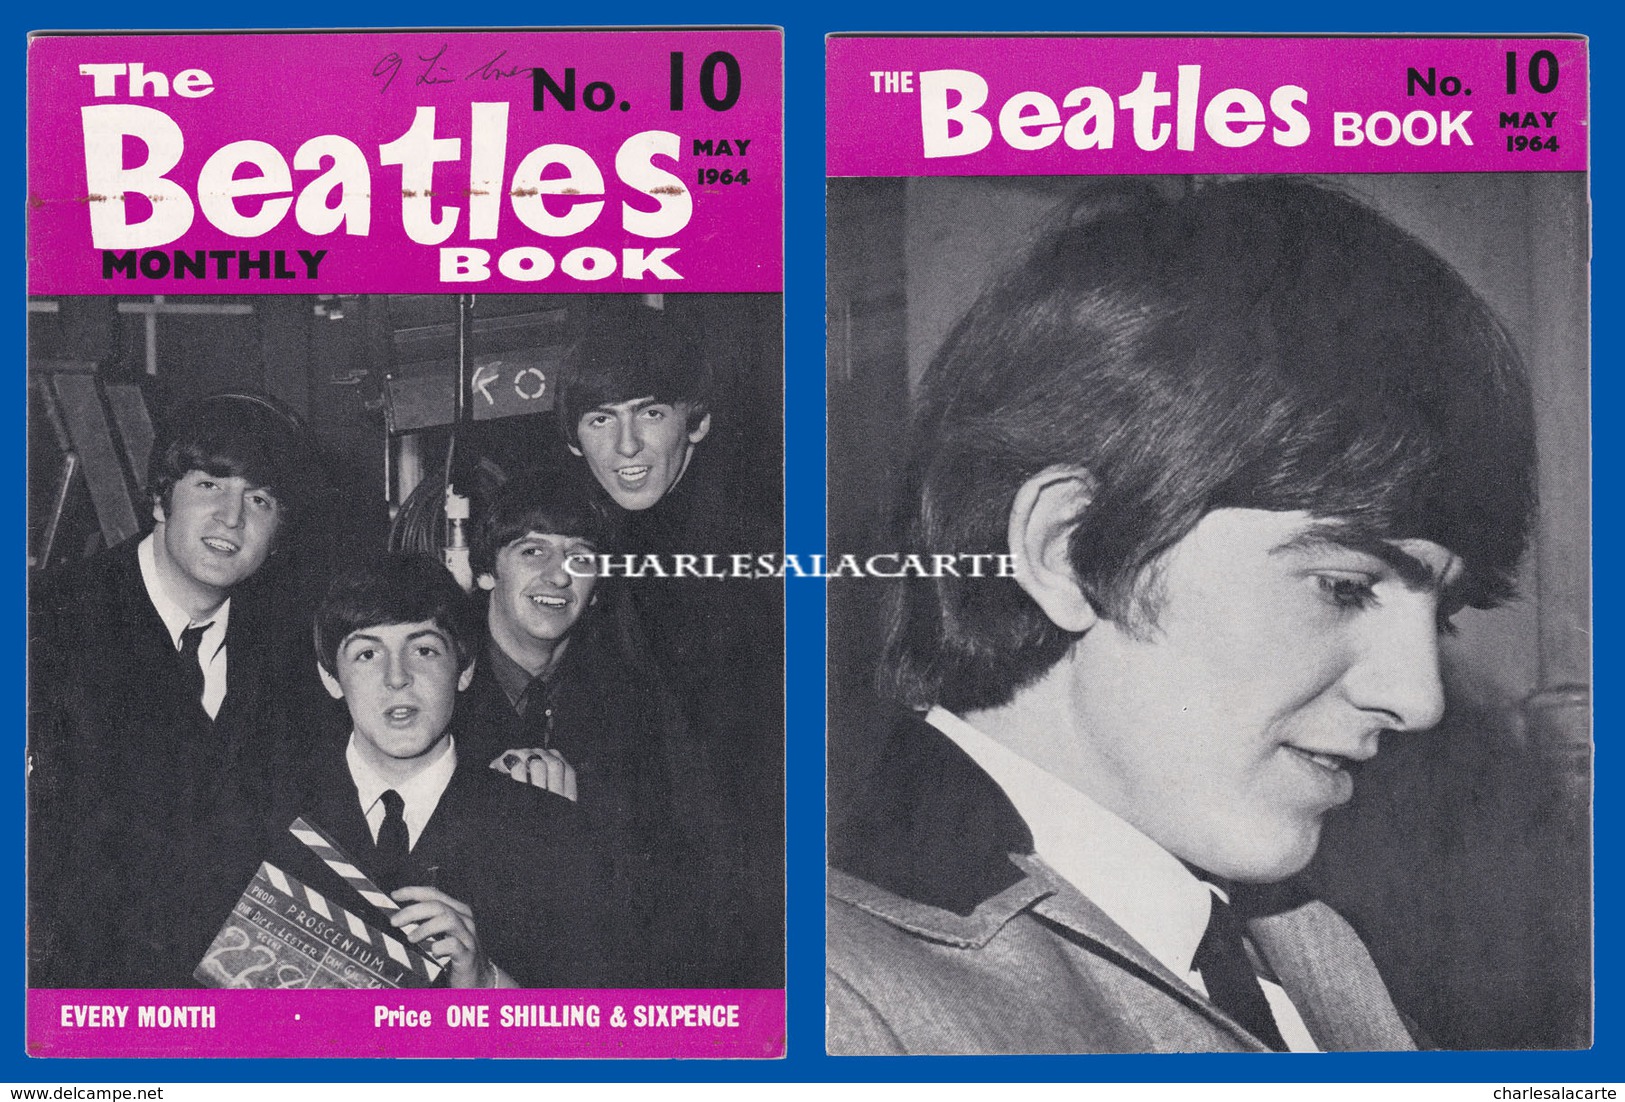 1964 MAY THE BEATLES MONTHLY BOOK No.10 AUTHENTIC SUBERB CONDITION SEE THE SCAN - Divertimento